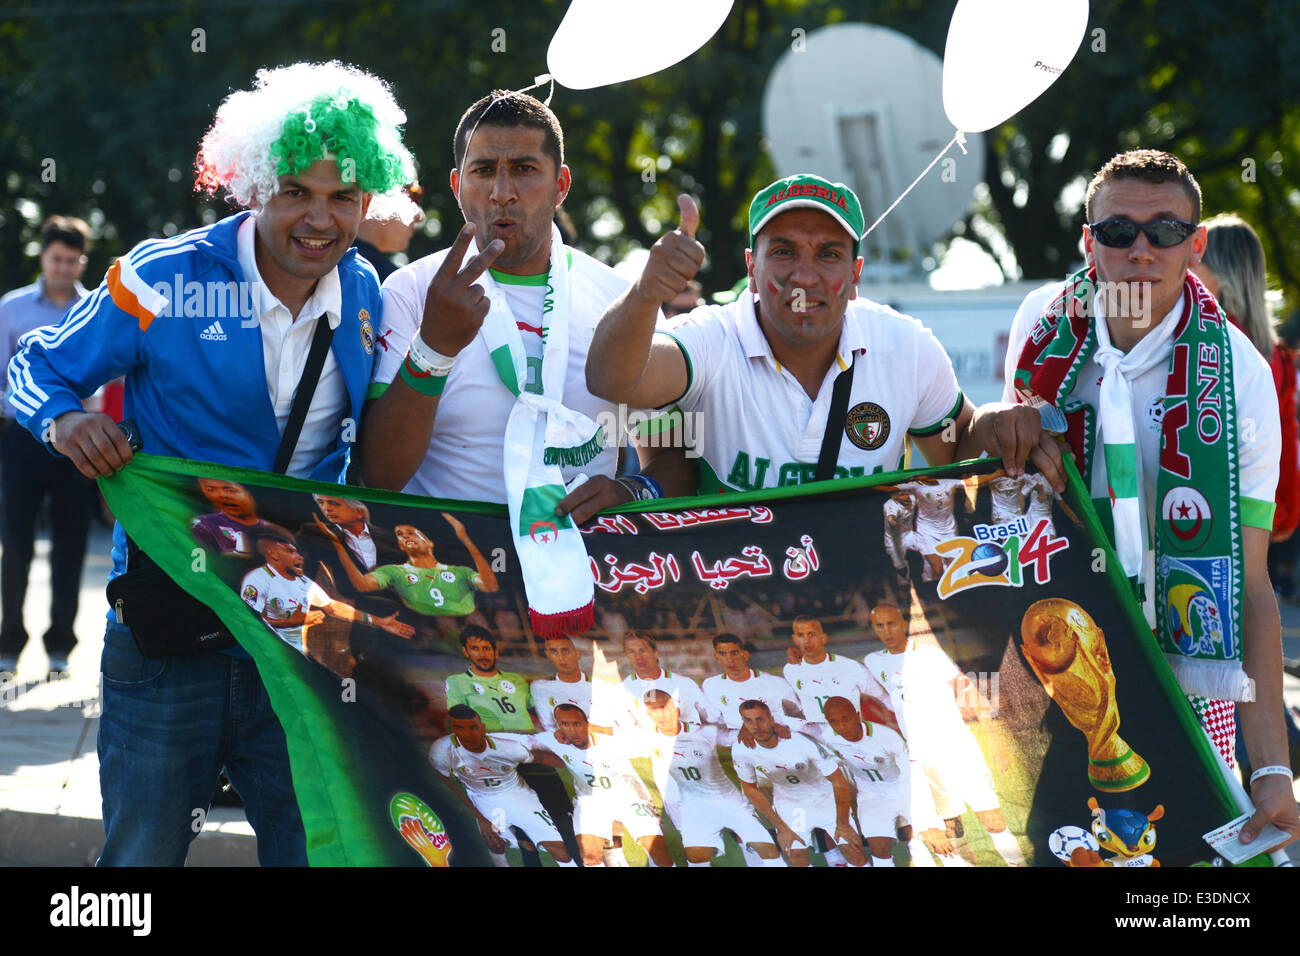 June 22, 2014 - Porto Alegre, Brazil - PORTO ALEGRE BRAZIL--22 June: algerian supporters before the match between South Korea and Algeria in the group stage of the 2014 World Cup, for the group H match at the Beira Rio stadium, on June 2, 2014. Photo: Edu Andrade/Urbanandsport /Nurphoto  (Credit Image: © Edu Andrade/NurPhoto/ZUMAPRESS.com) Stock Photo